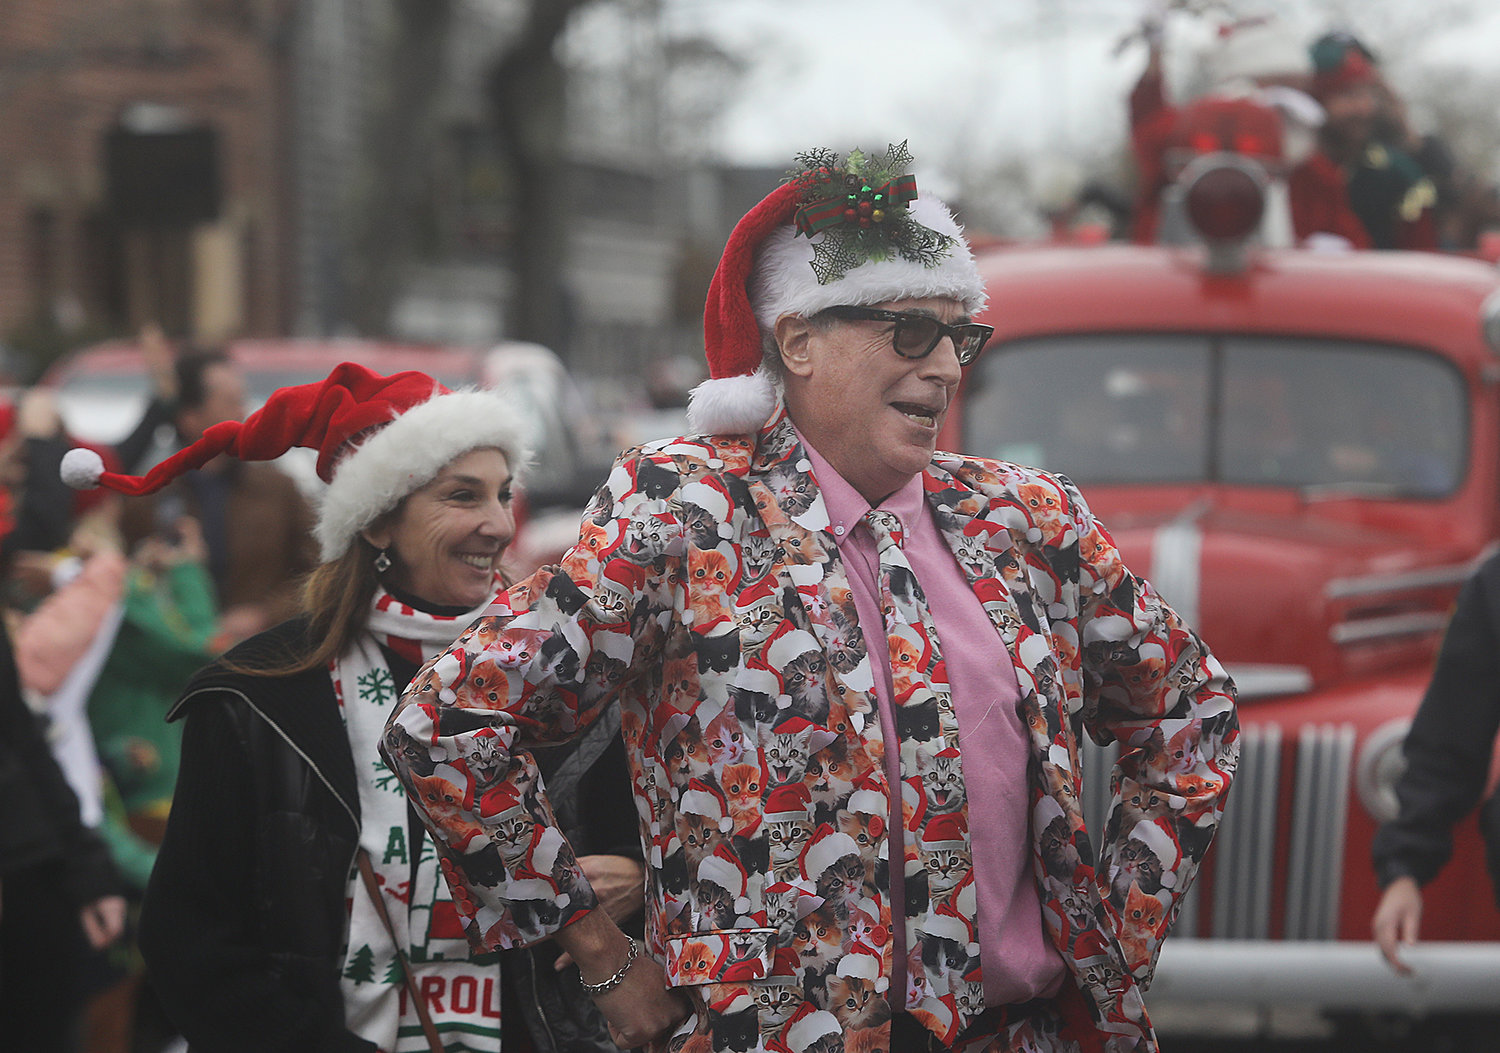 DECEMBER 3, 2022 -- Adam Dread helps lead the Santa parade on Main Street during Christmas Stroll. Photo by Ray K. Saunders